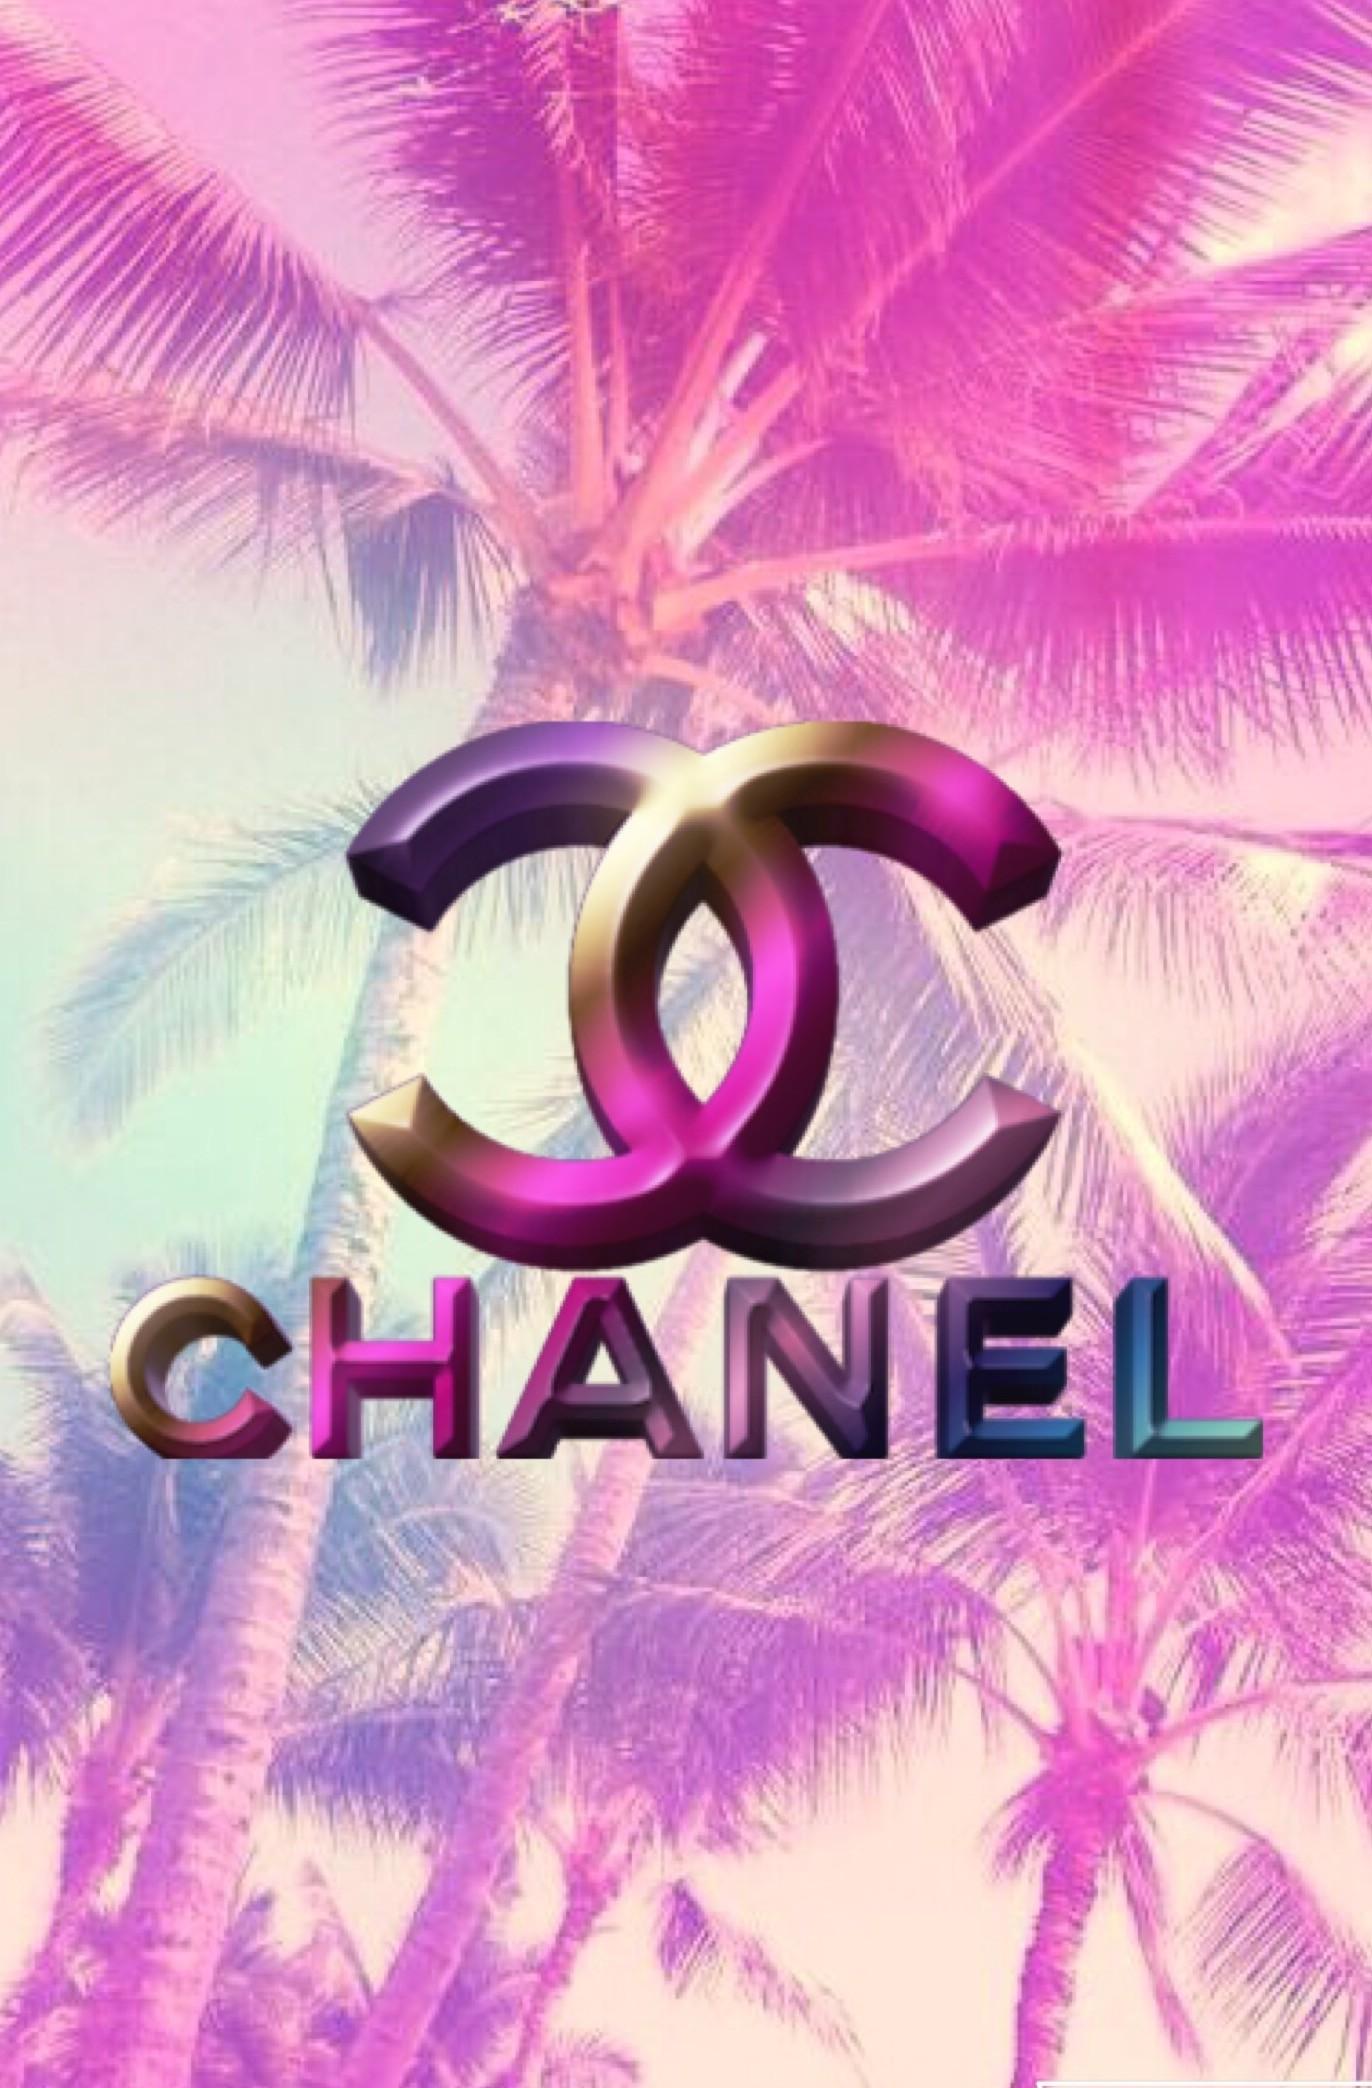 Chanel Brand Wallpapers Wallpaper Cave